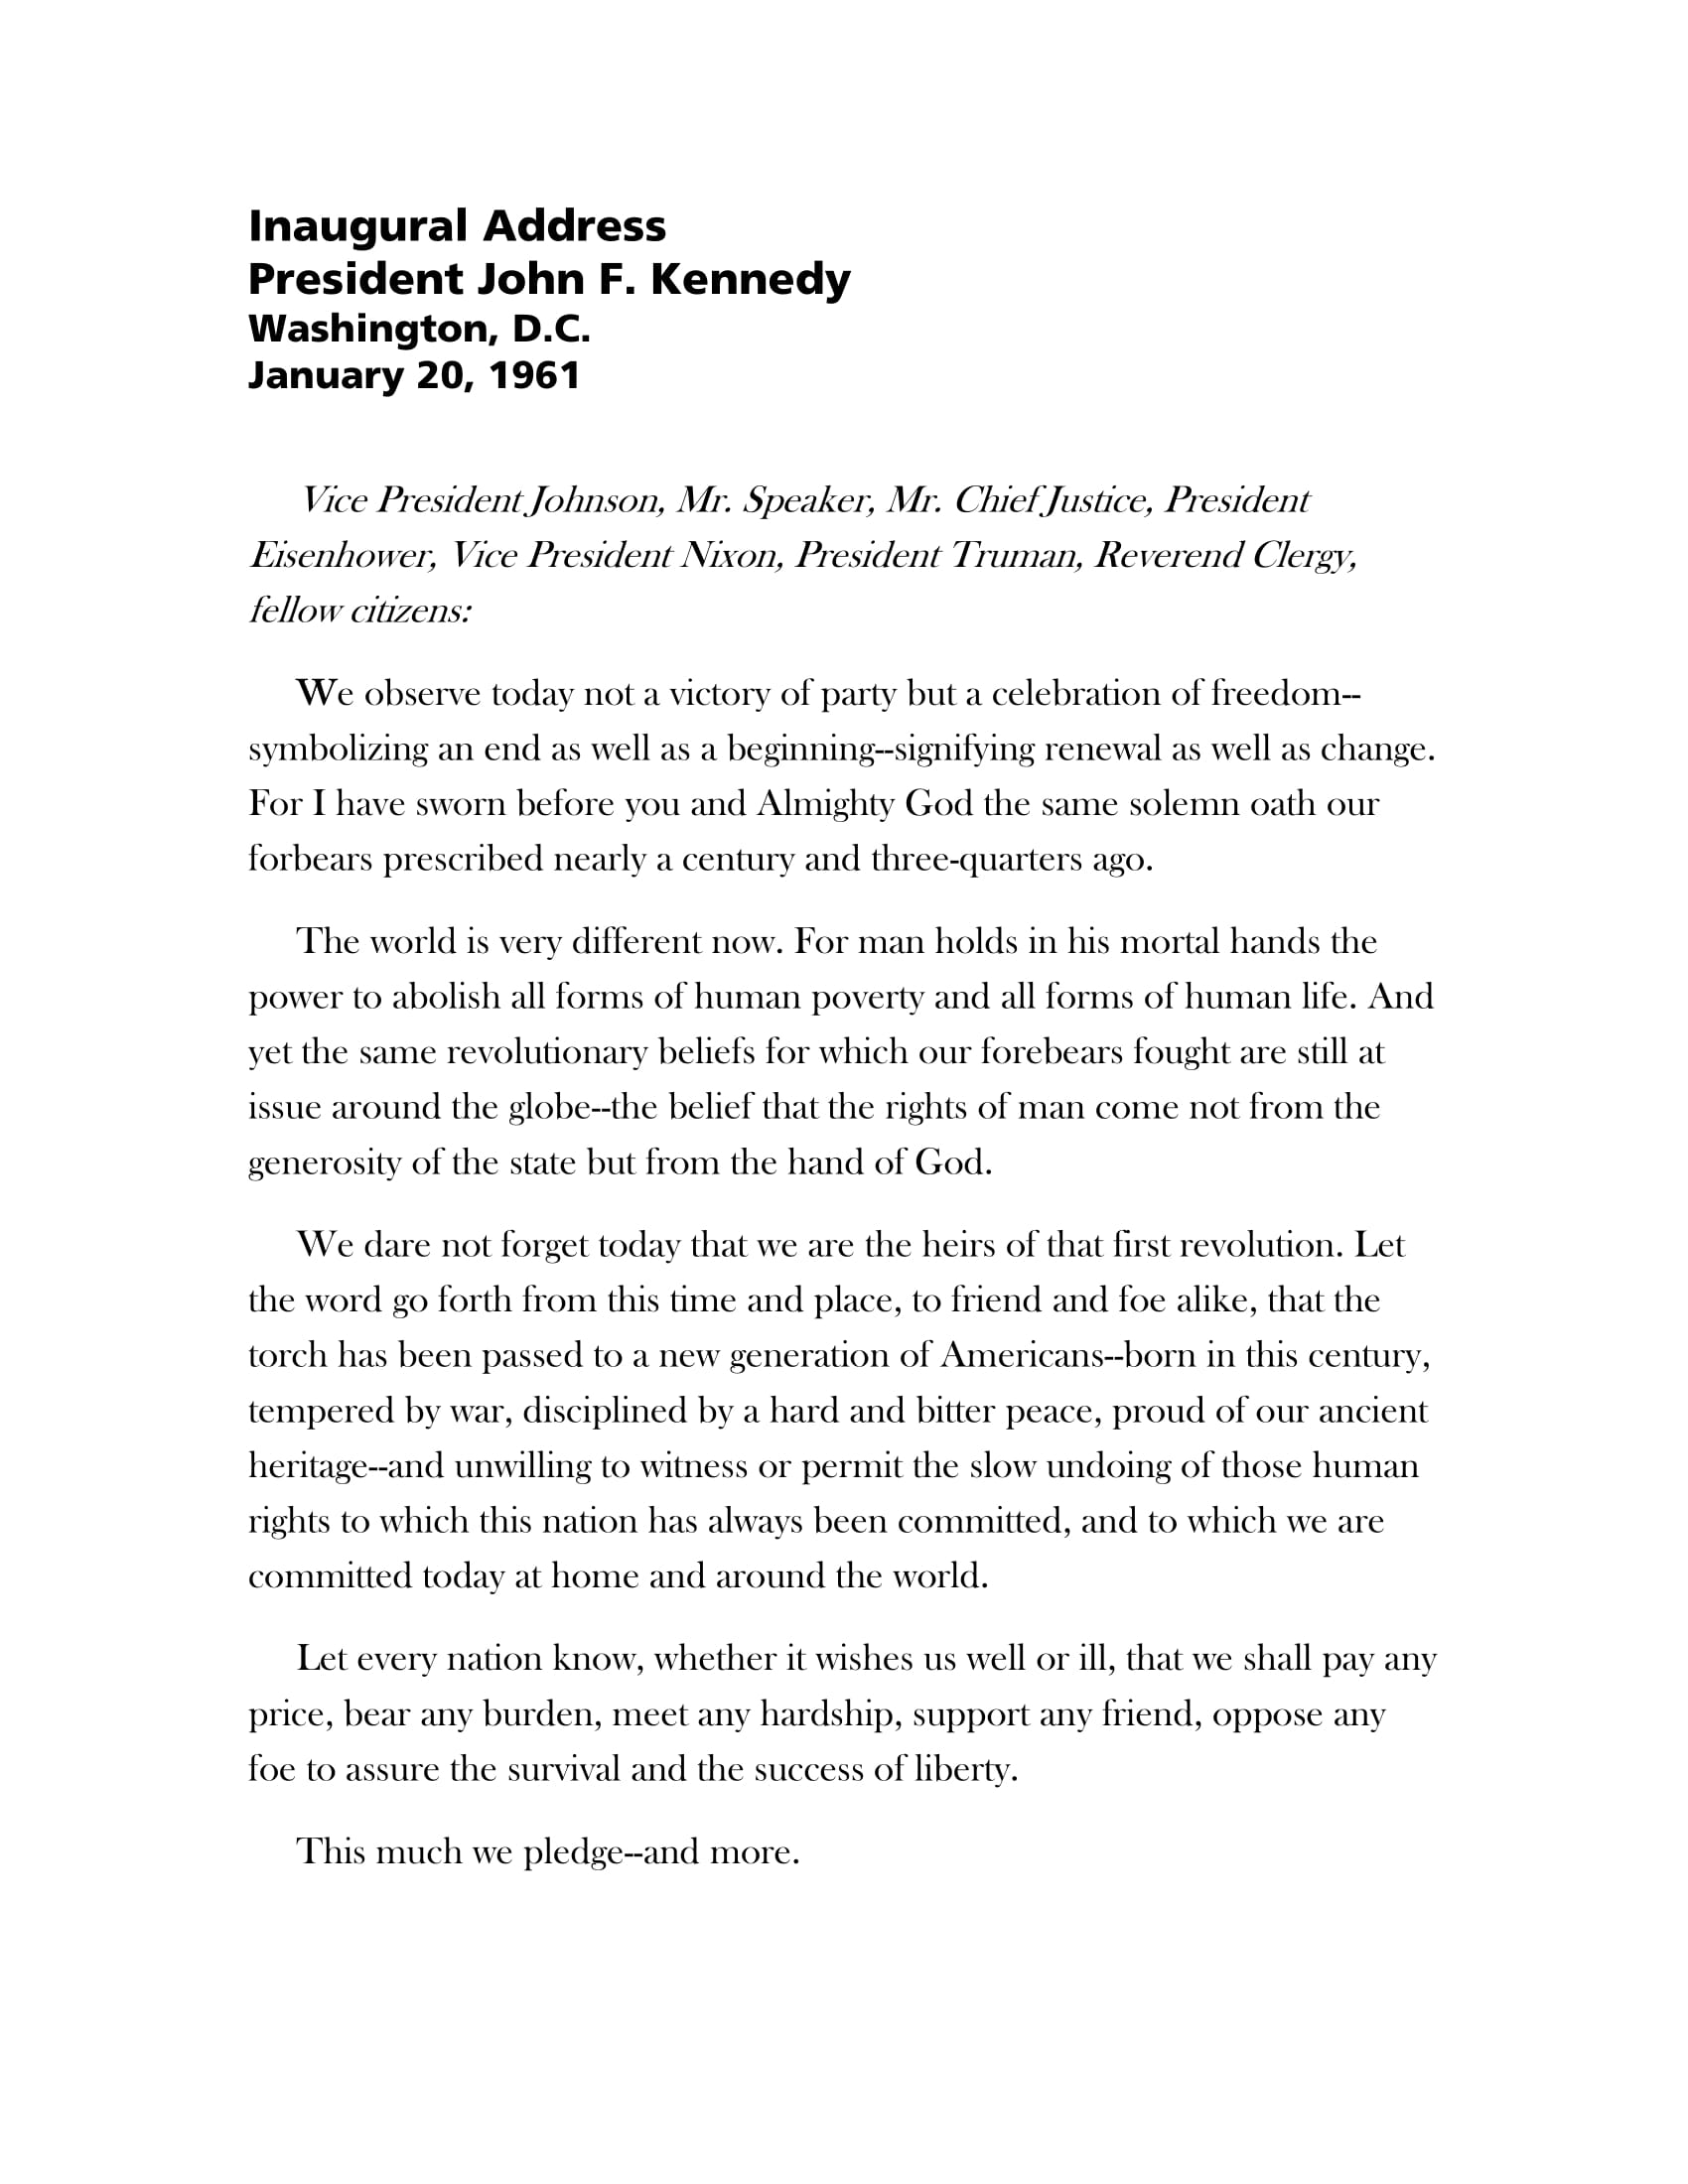 9+ Inauguration Speech Examples - PDF  Examples